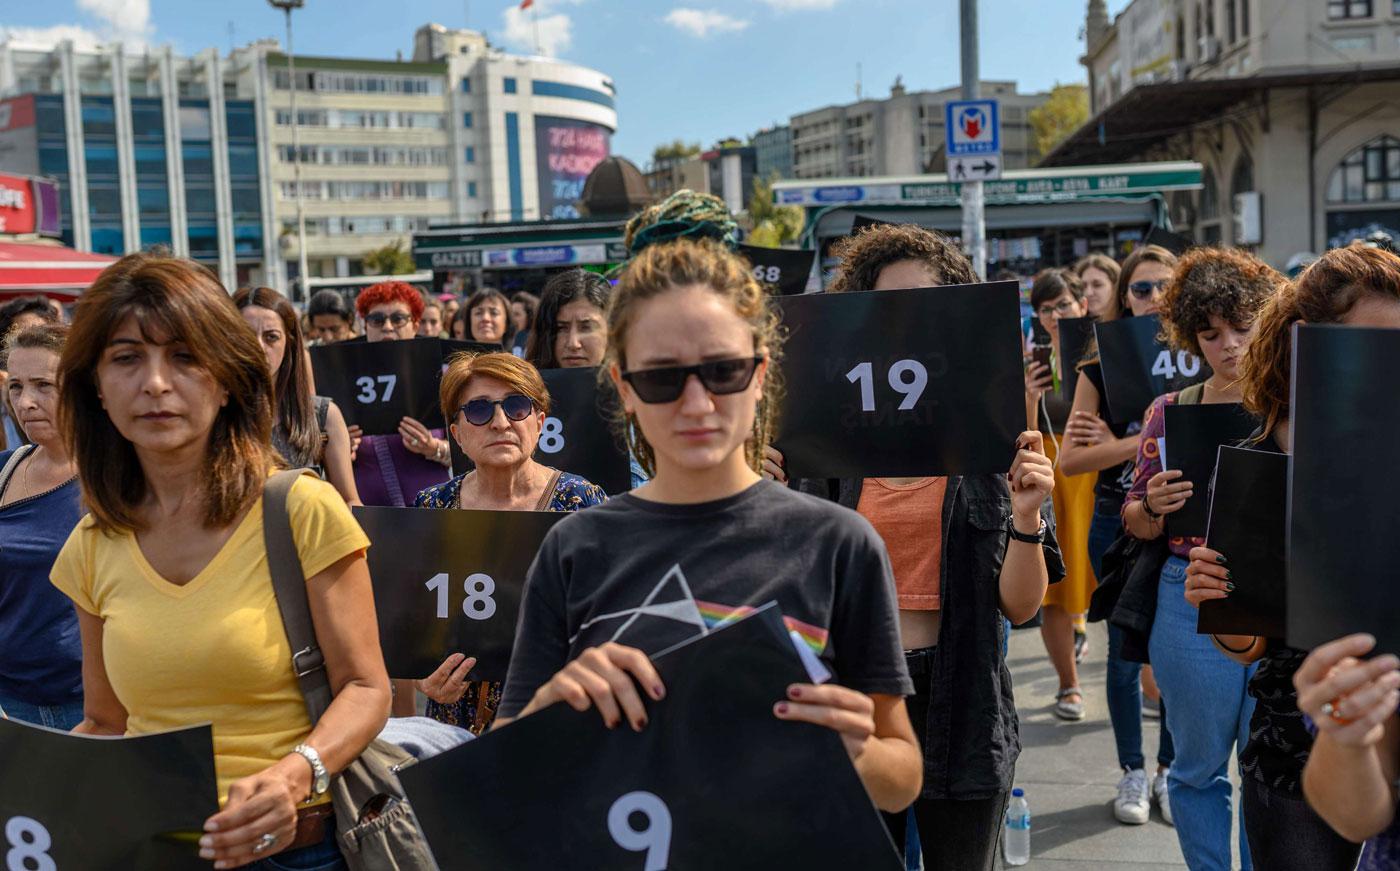 hold signs with different numbers symbolizing the women murders during a protest against gender violence in Istanbul